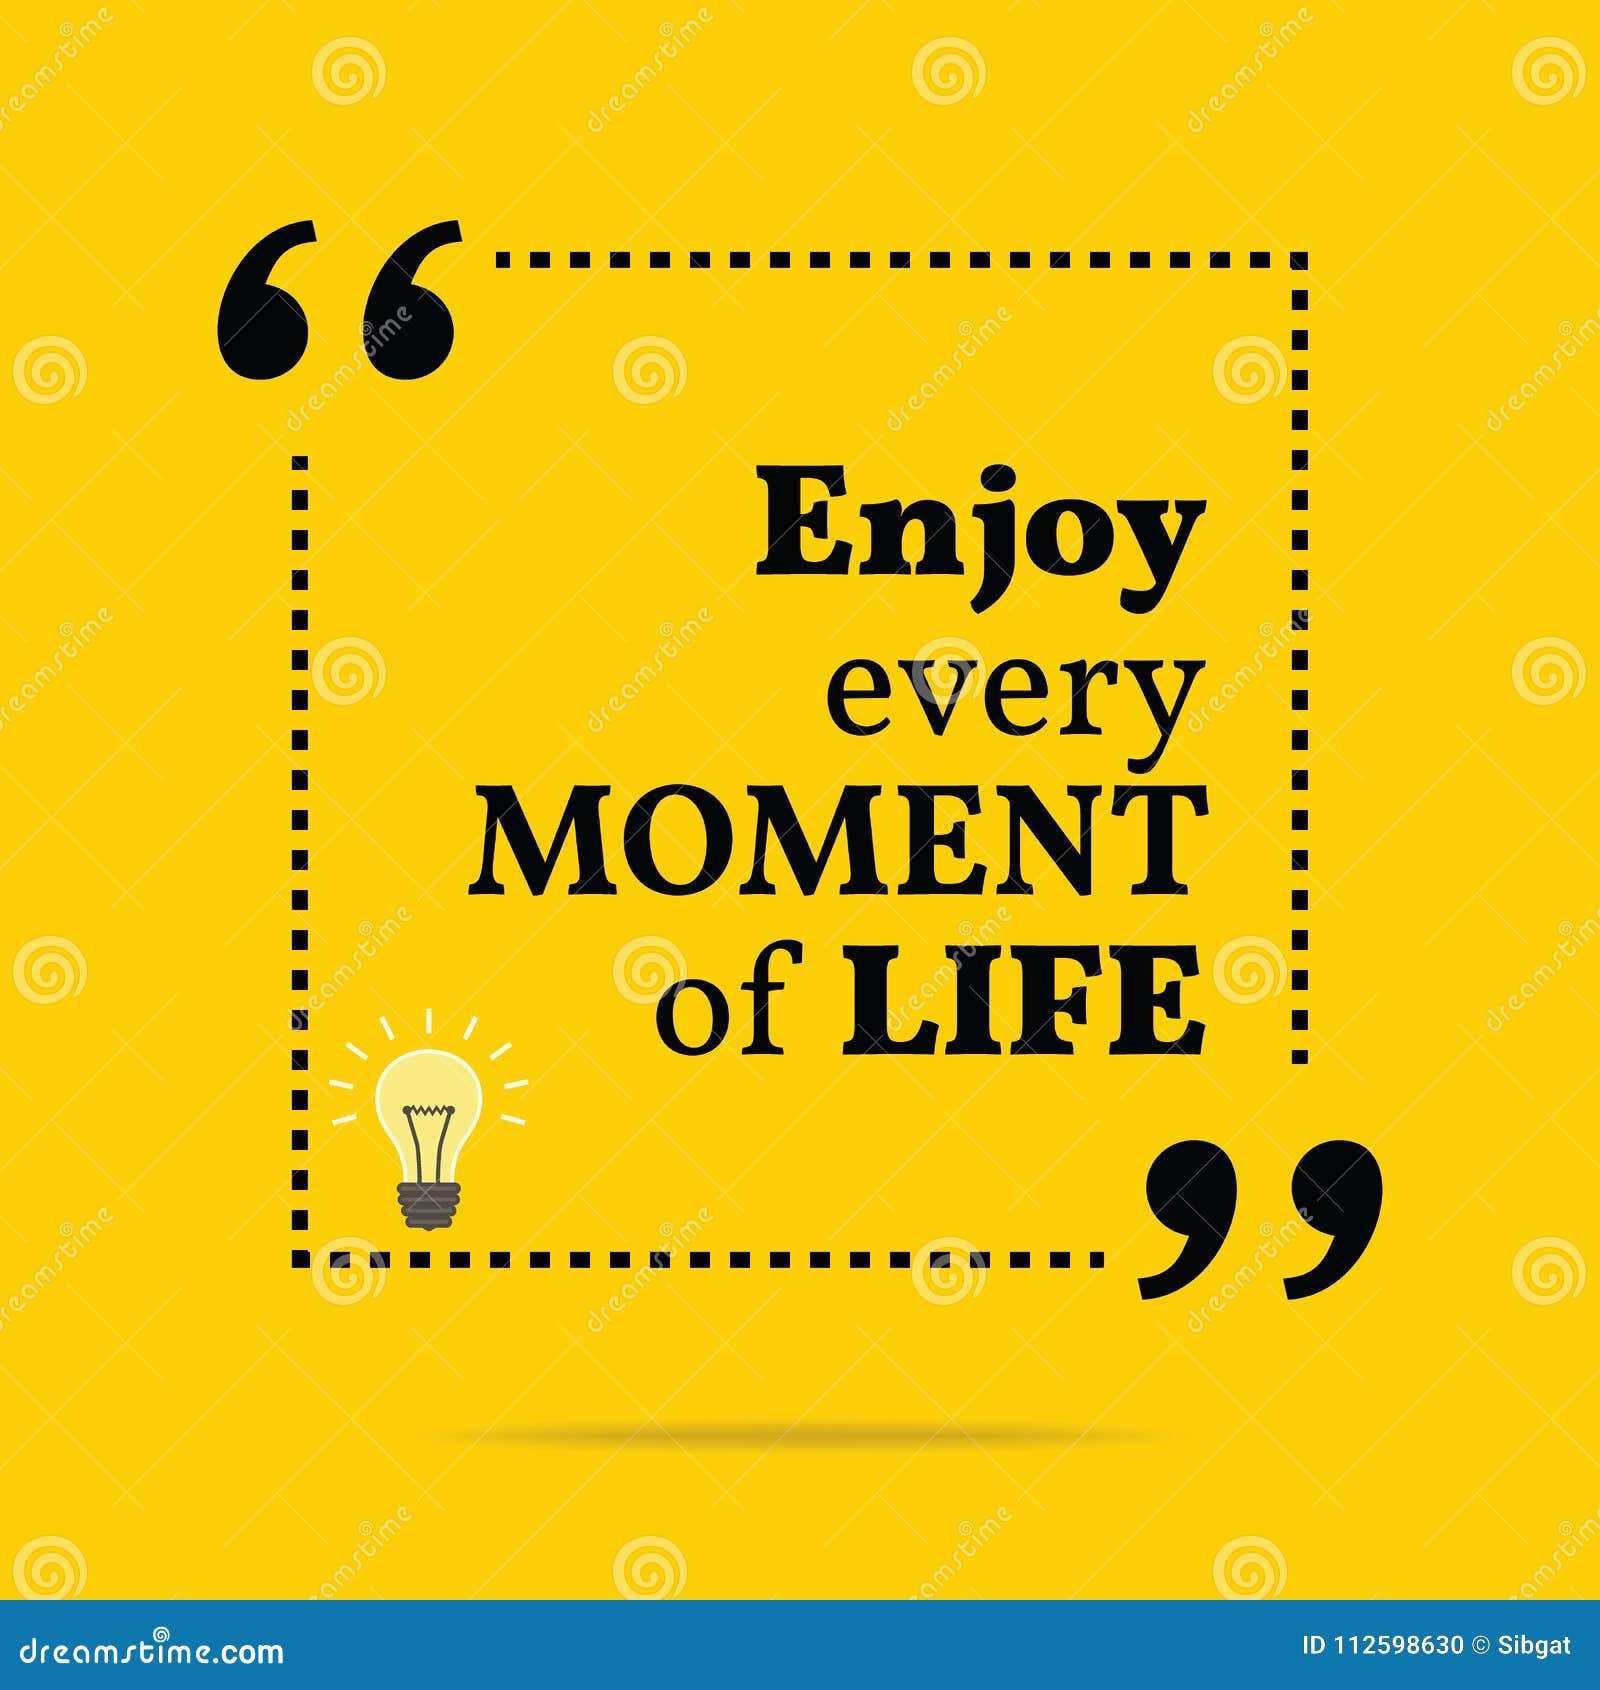 Quote About Enjoying Life (Quote Image)